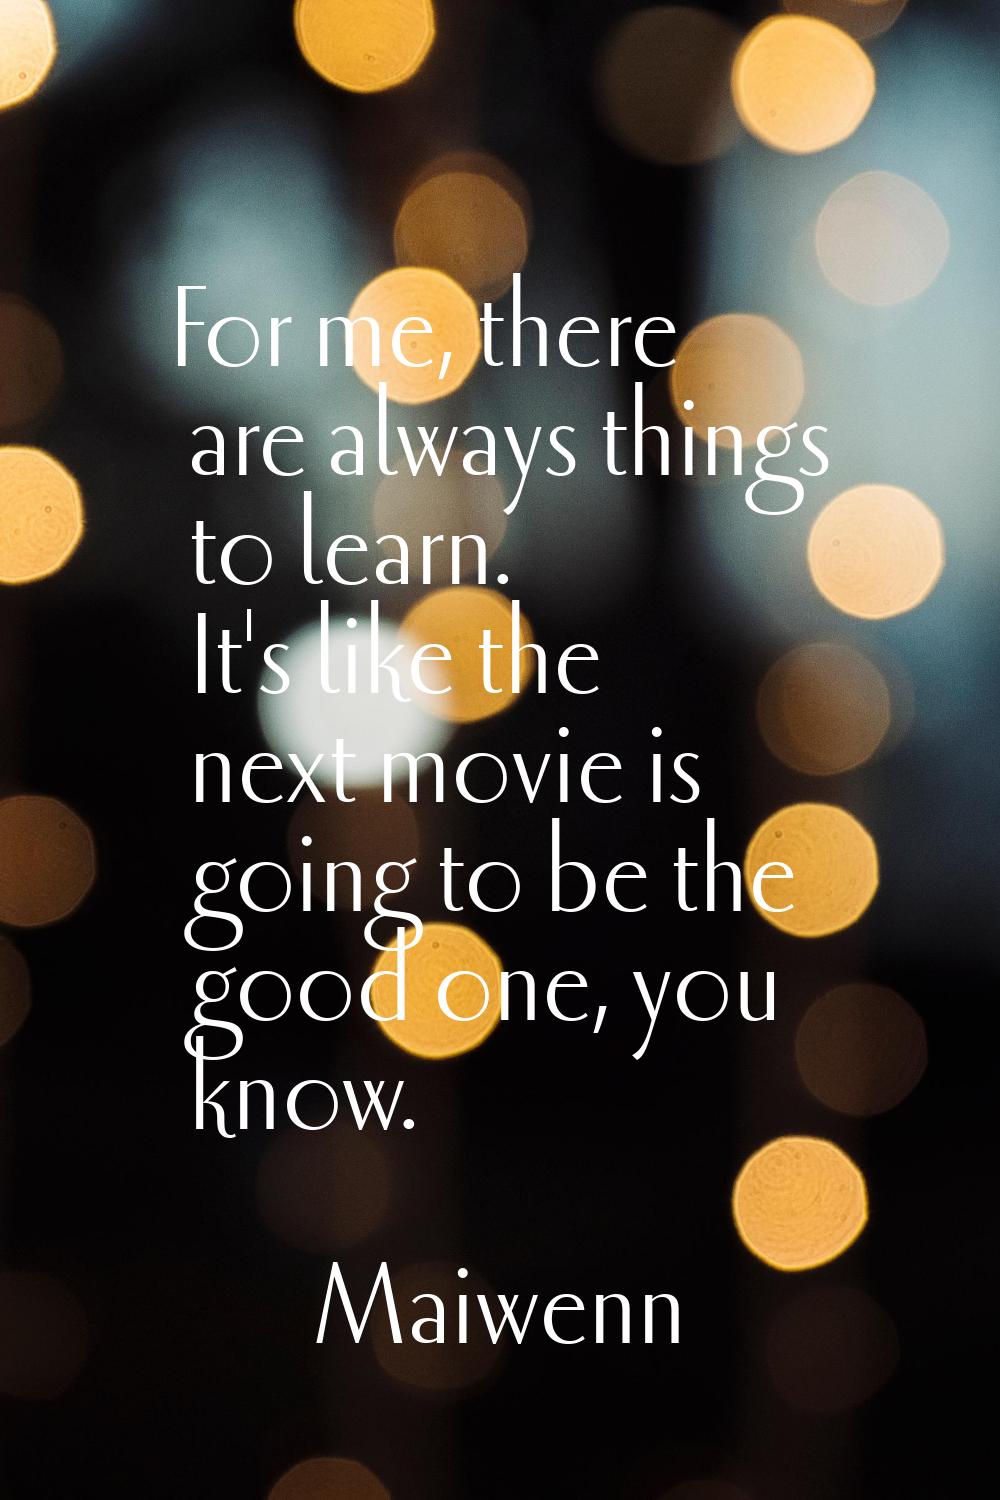 For me, there are always things to learn. It's like the next movie is going to be the good one, you